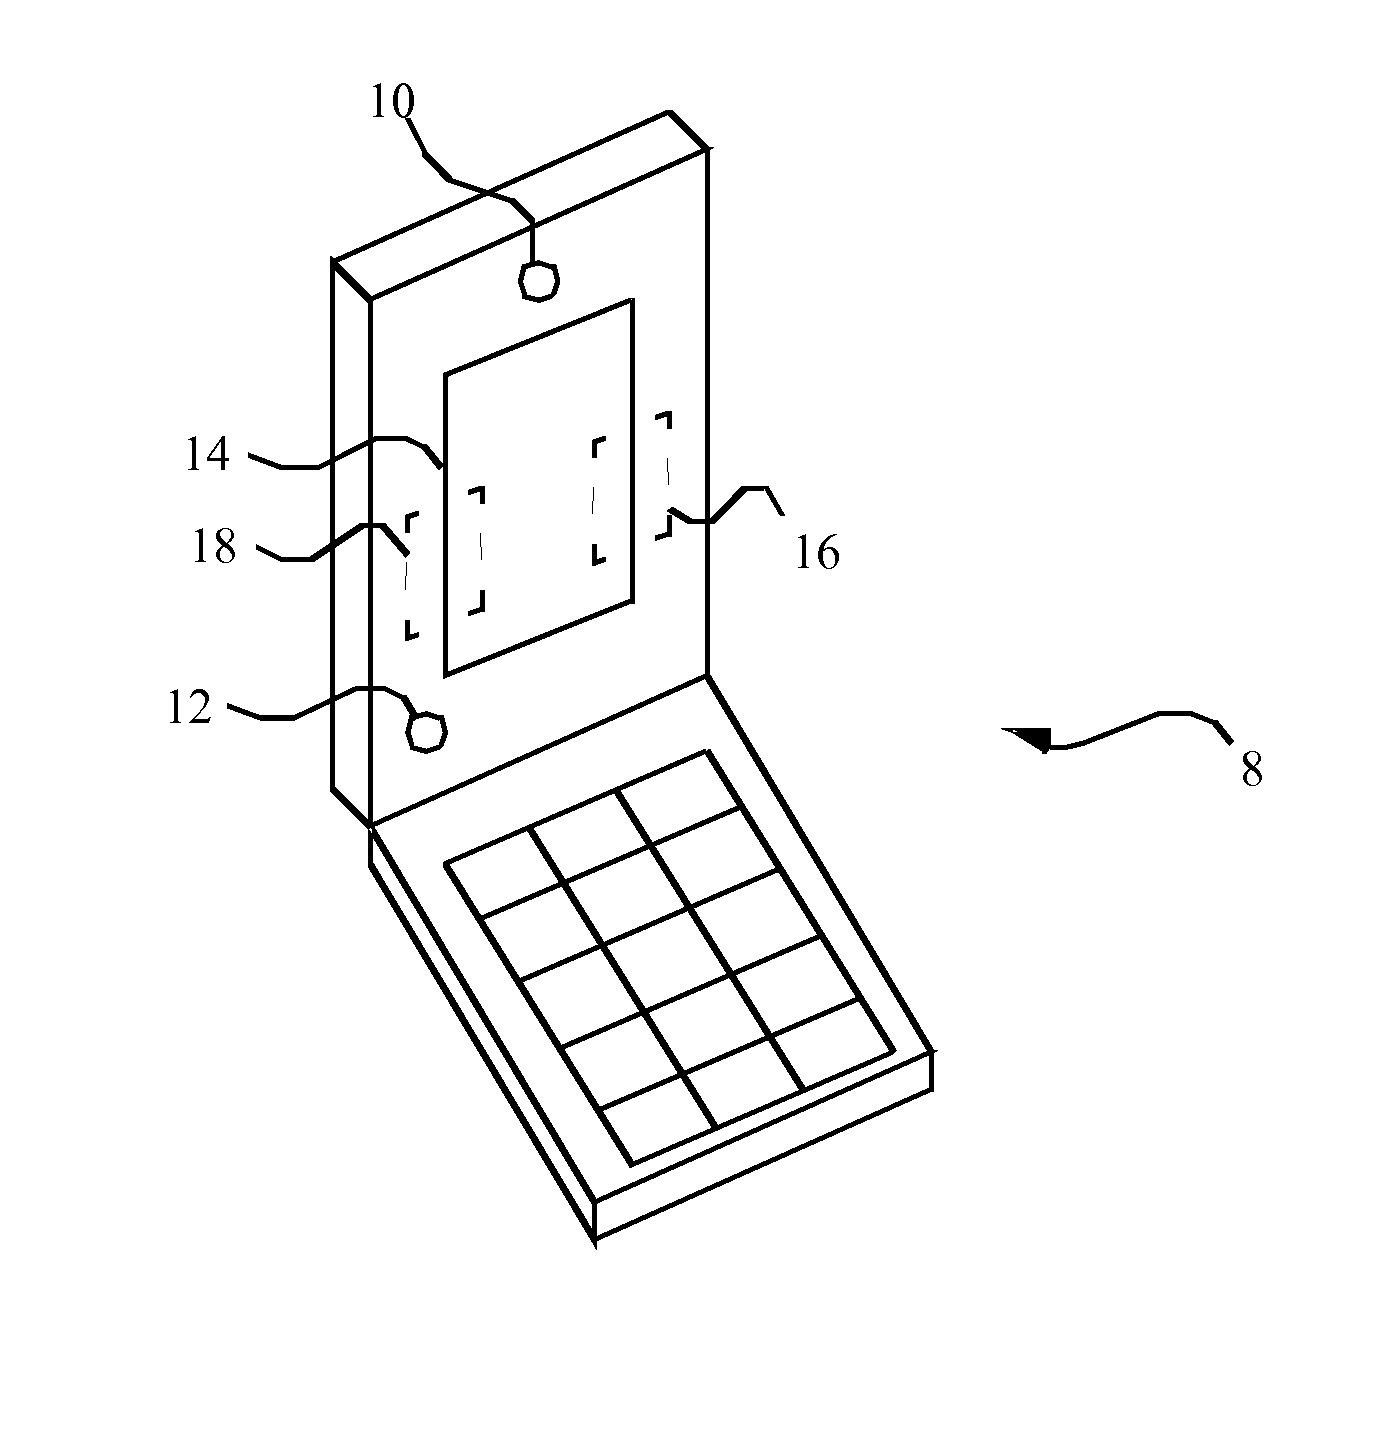 Image capture apparatus with indicator